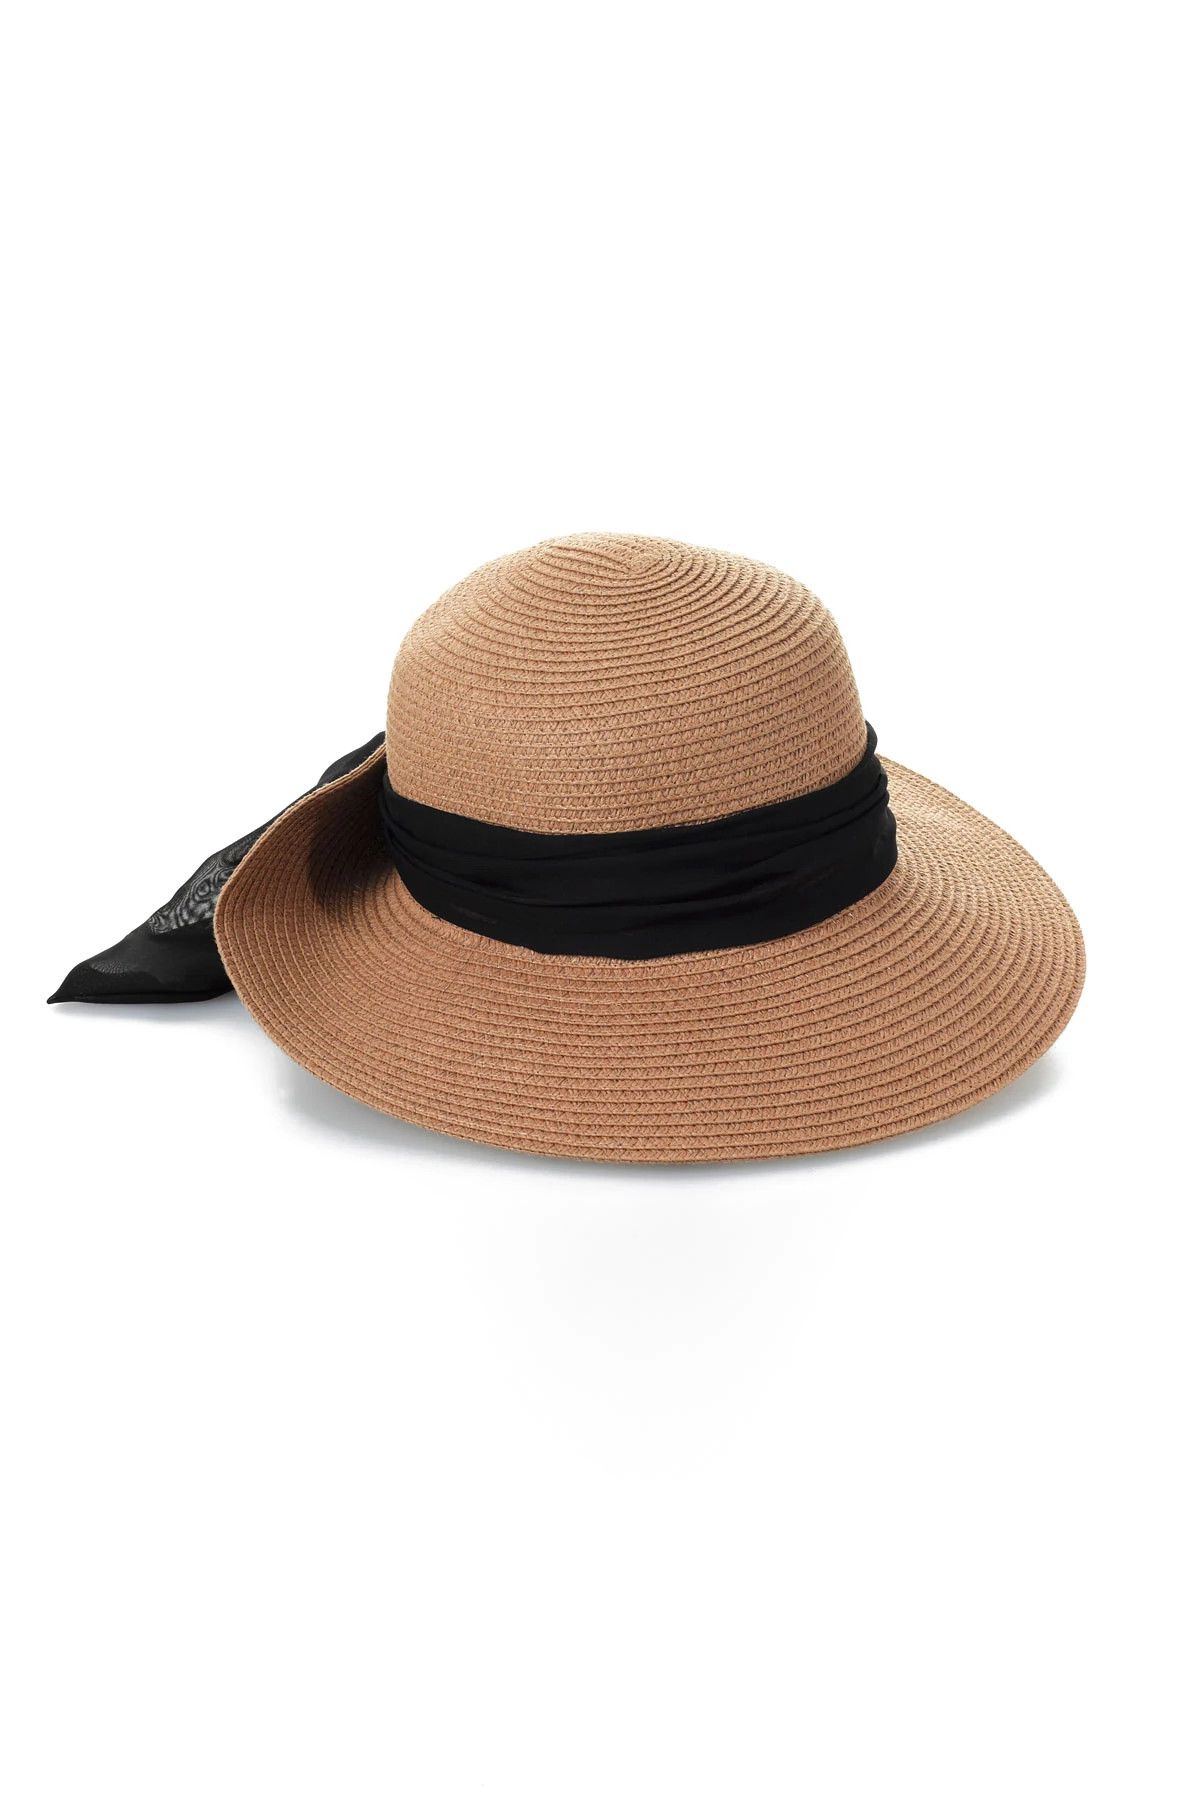 Scarf Trim Sun Hat | Everything But Water